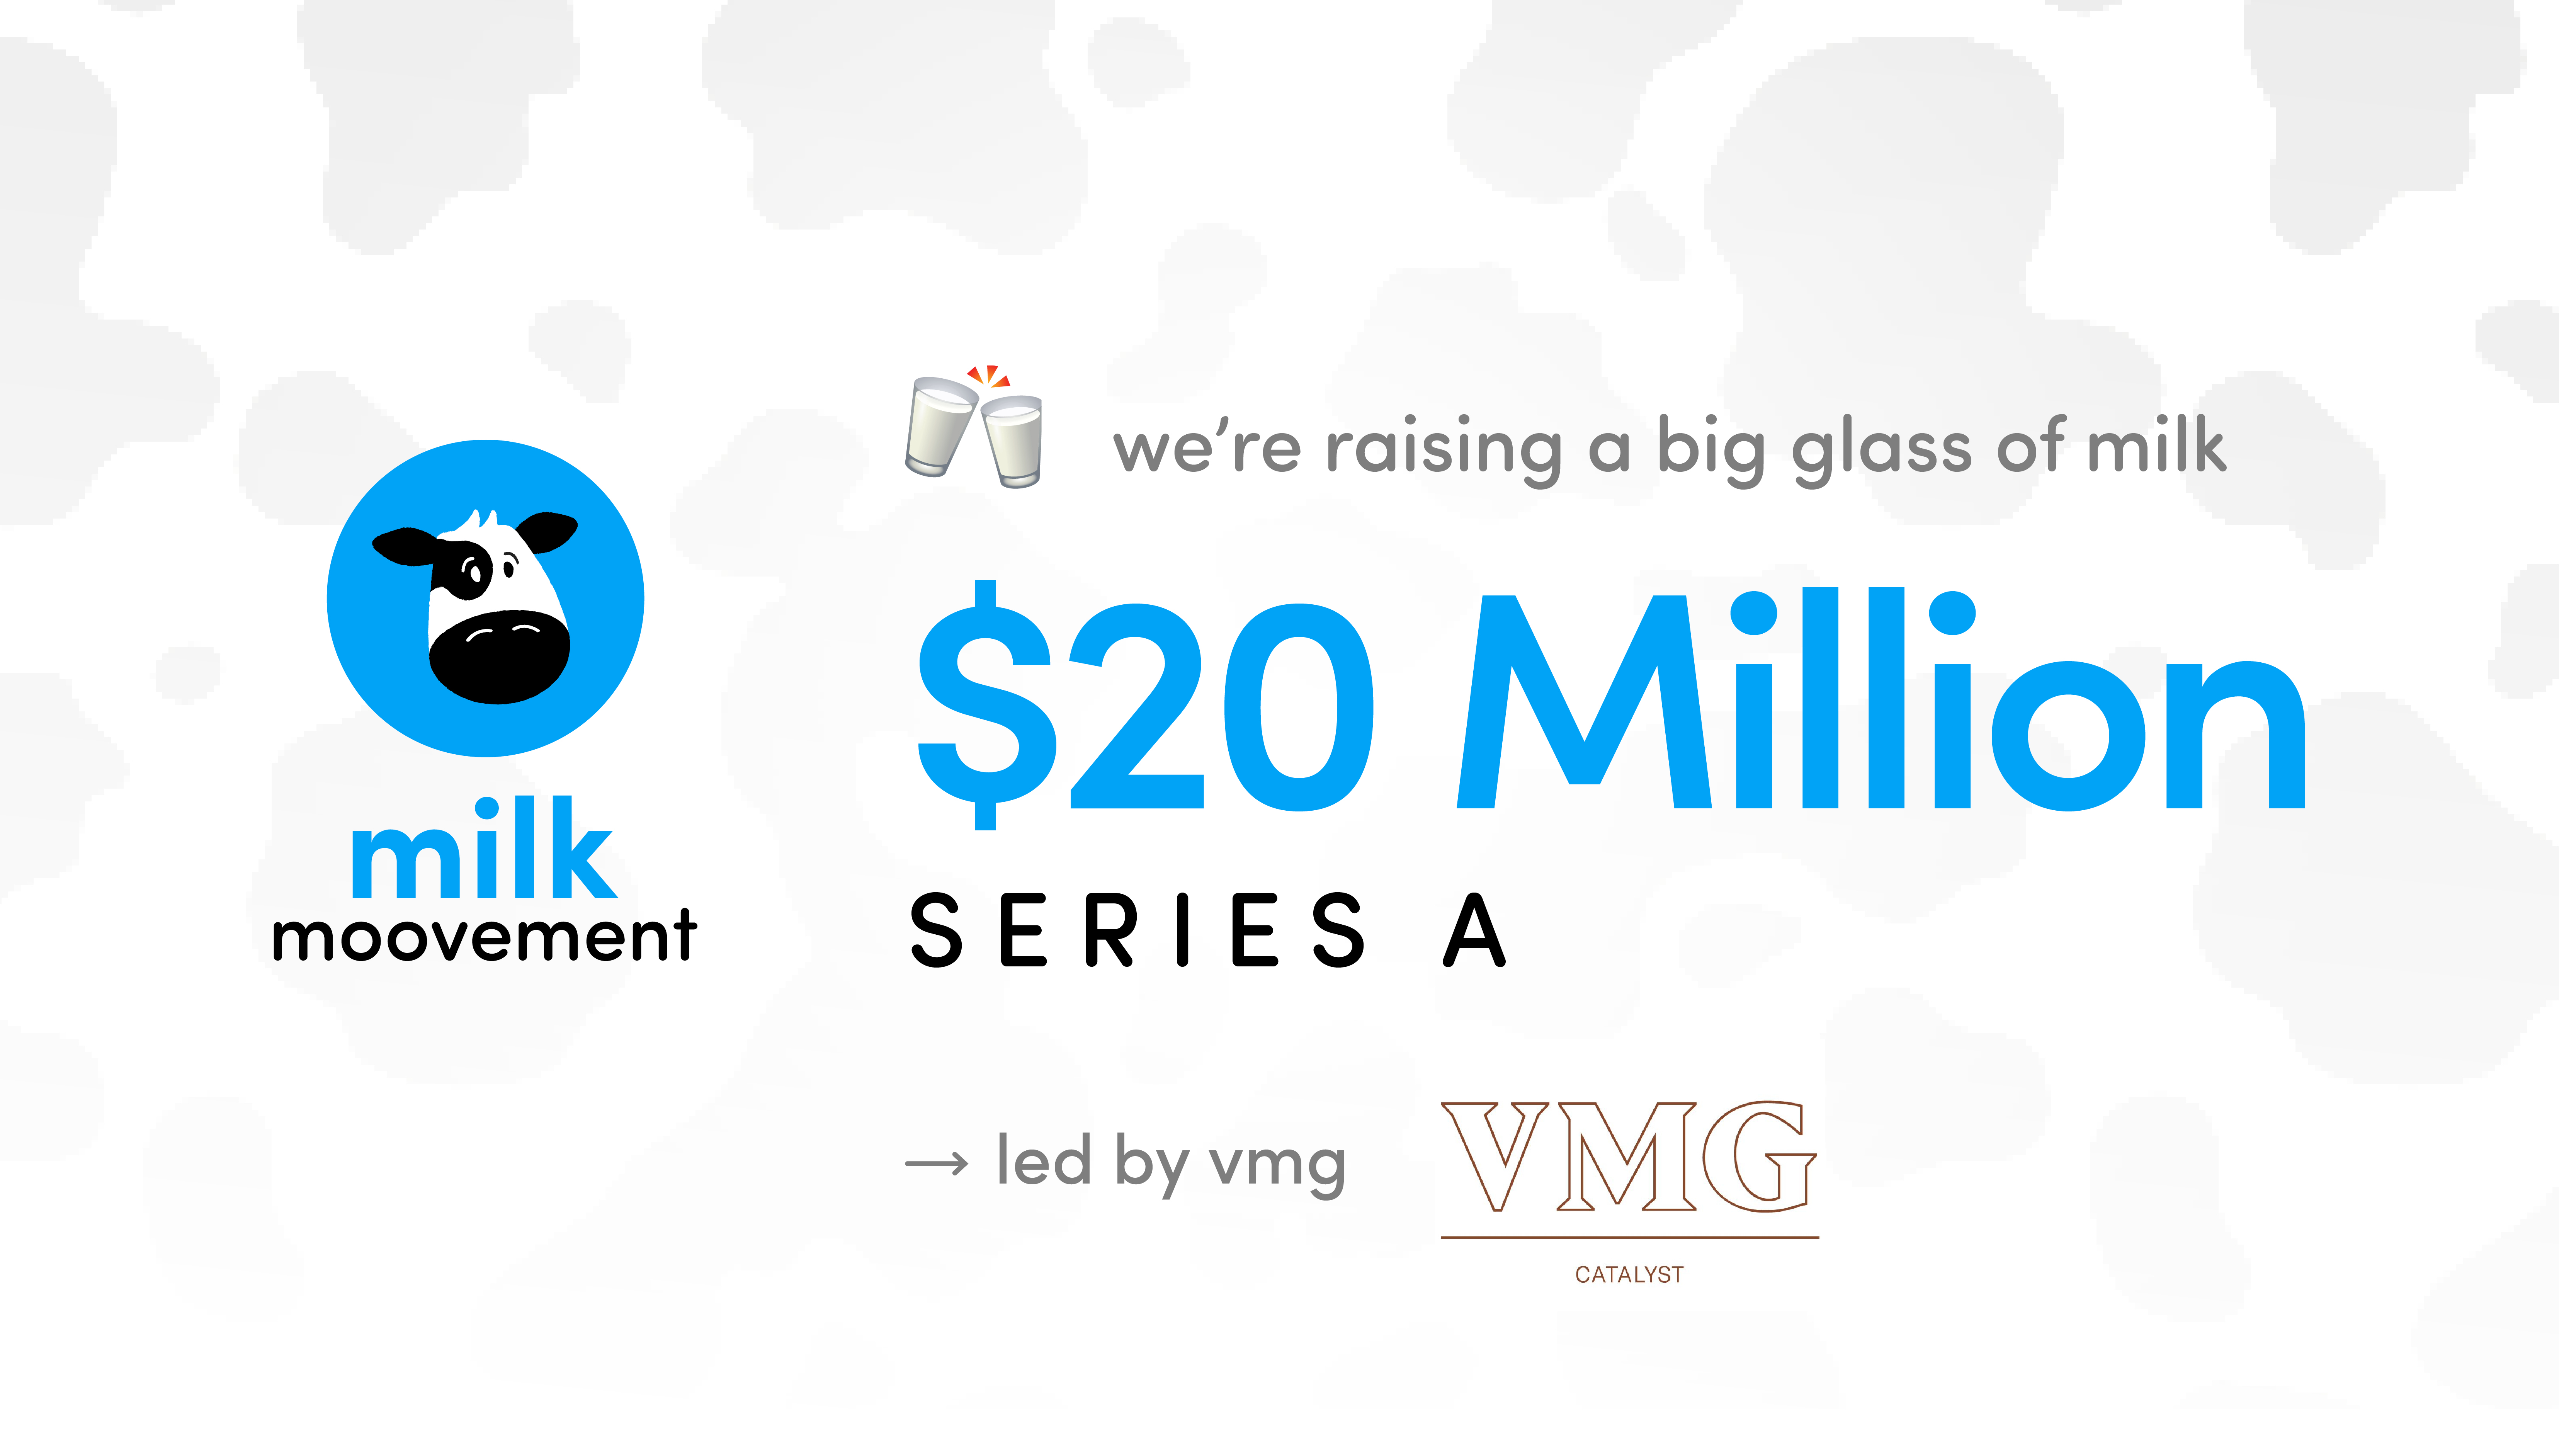 We're raising a big glass of milk. Announcing a $20 million USD series A round of funding led by VMG Catalyst